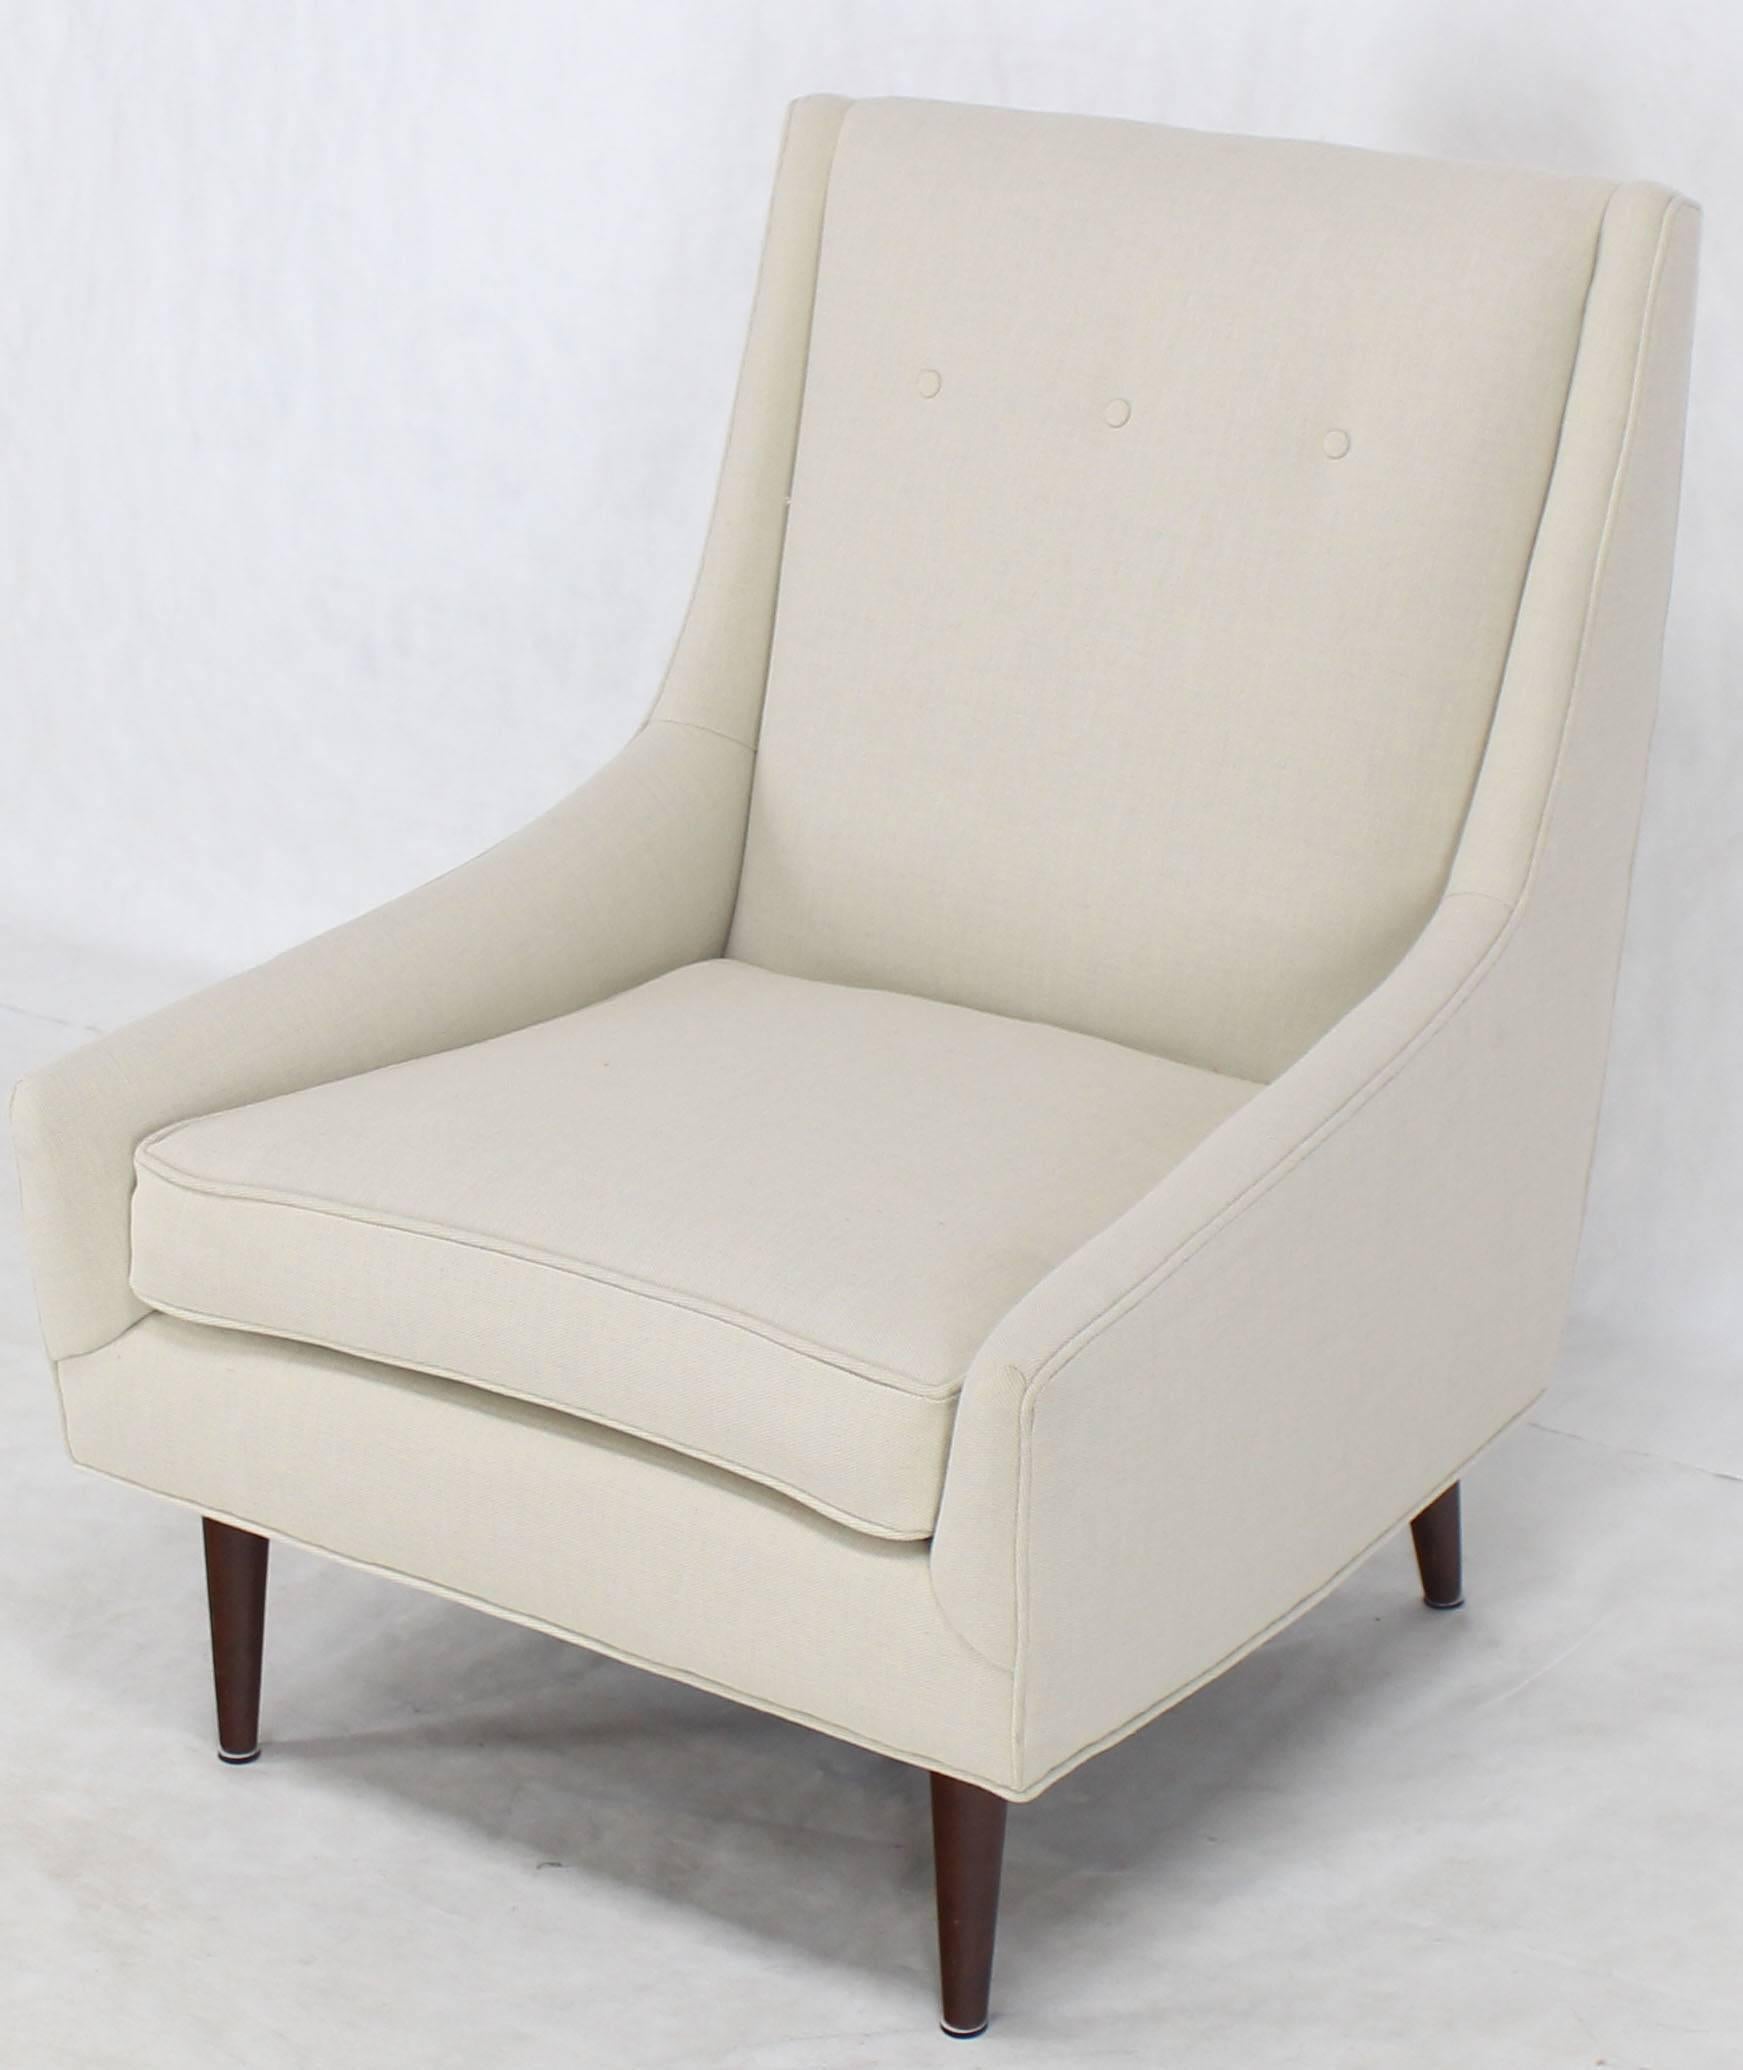 American New Upholstery Mid-Century Modern Lounge Chair For Sale